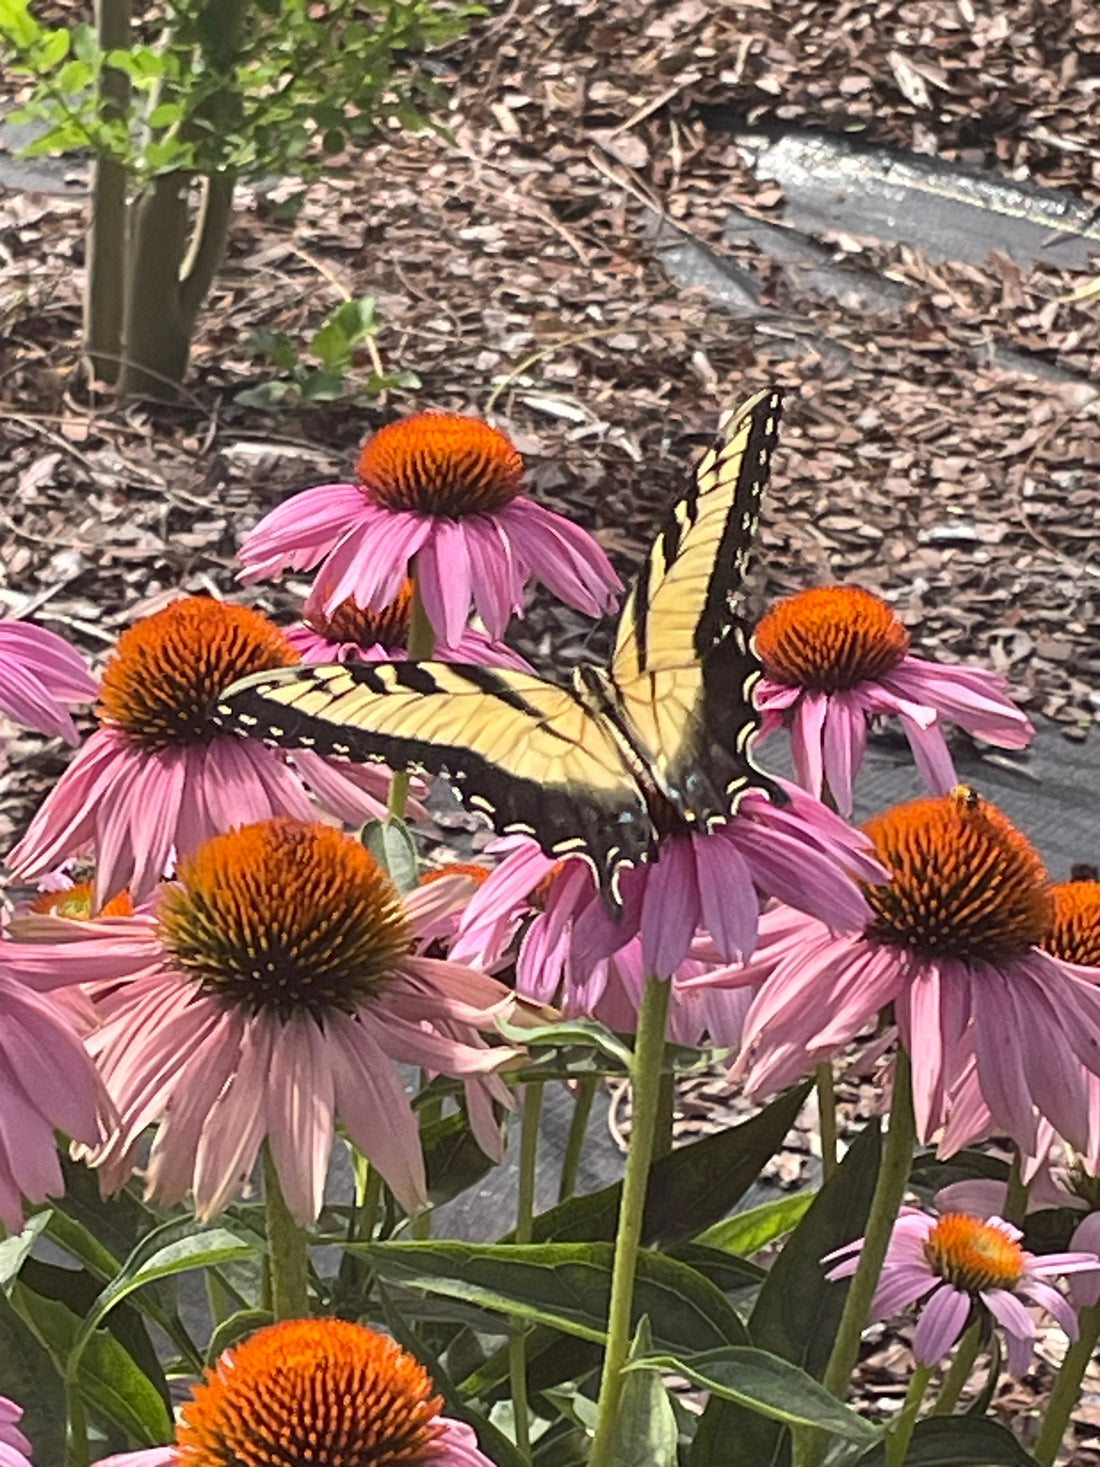 tiger swallowtail at Eden of Wings gardens